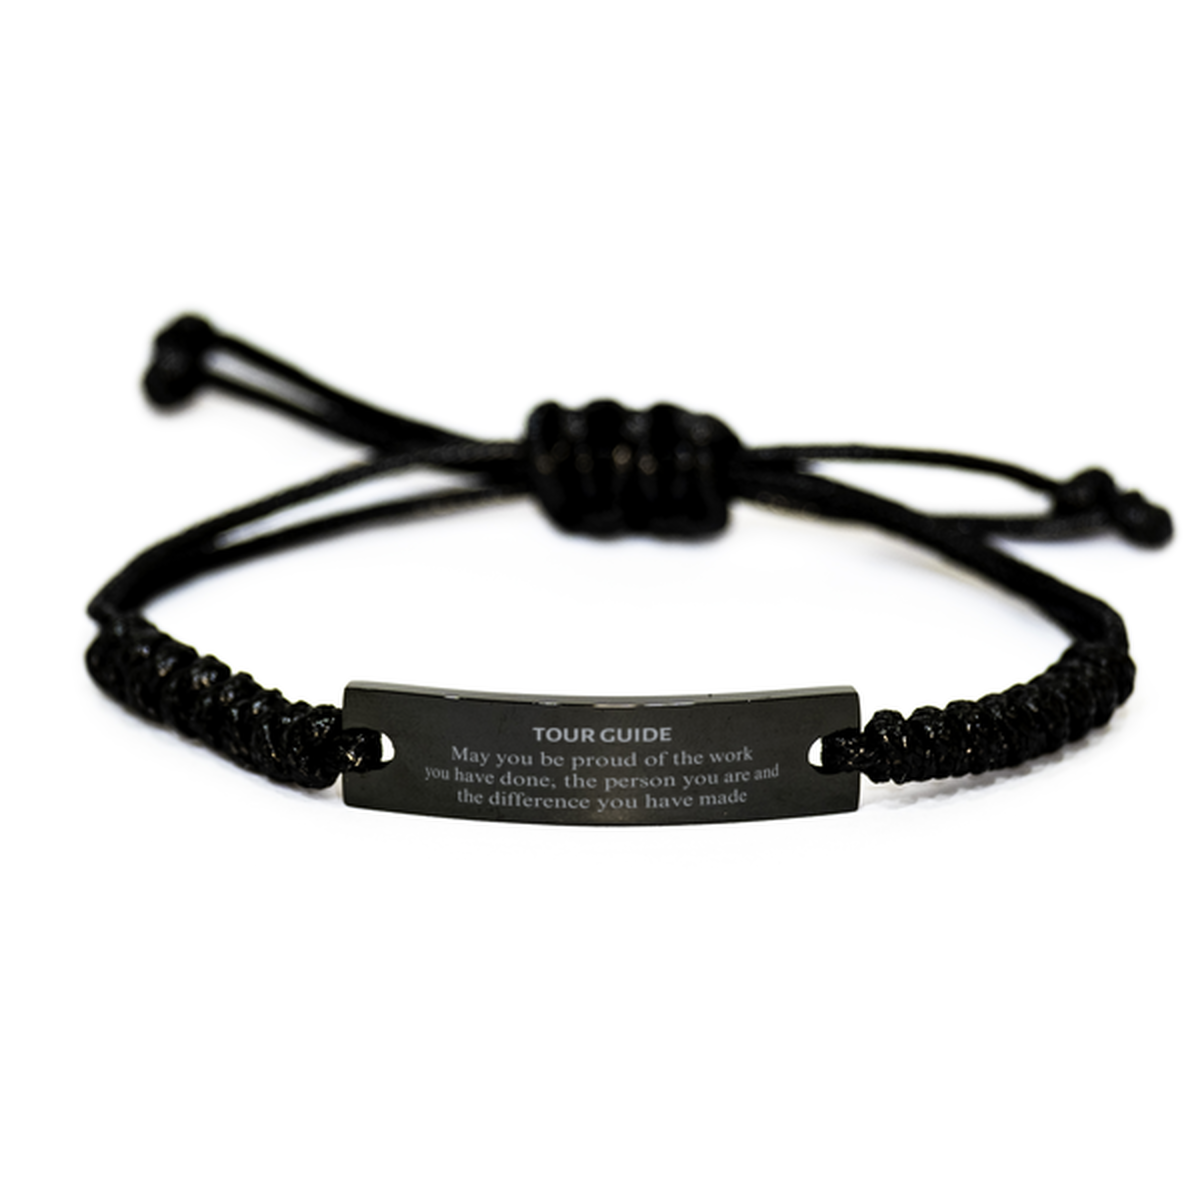 Tour Guide May you be proud of the work you have done, Retirement Tour Guide Black Rope Bracelet for Colleague Appreciation Gifts Amazing for Tour Guide